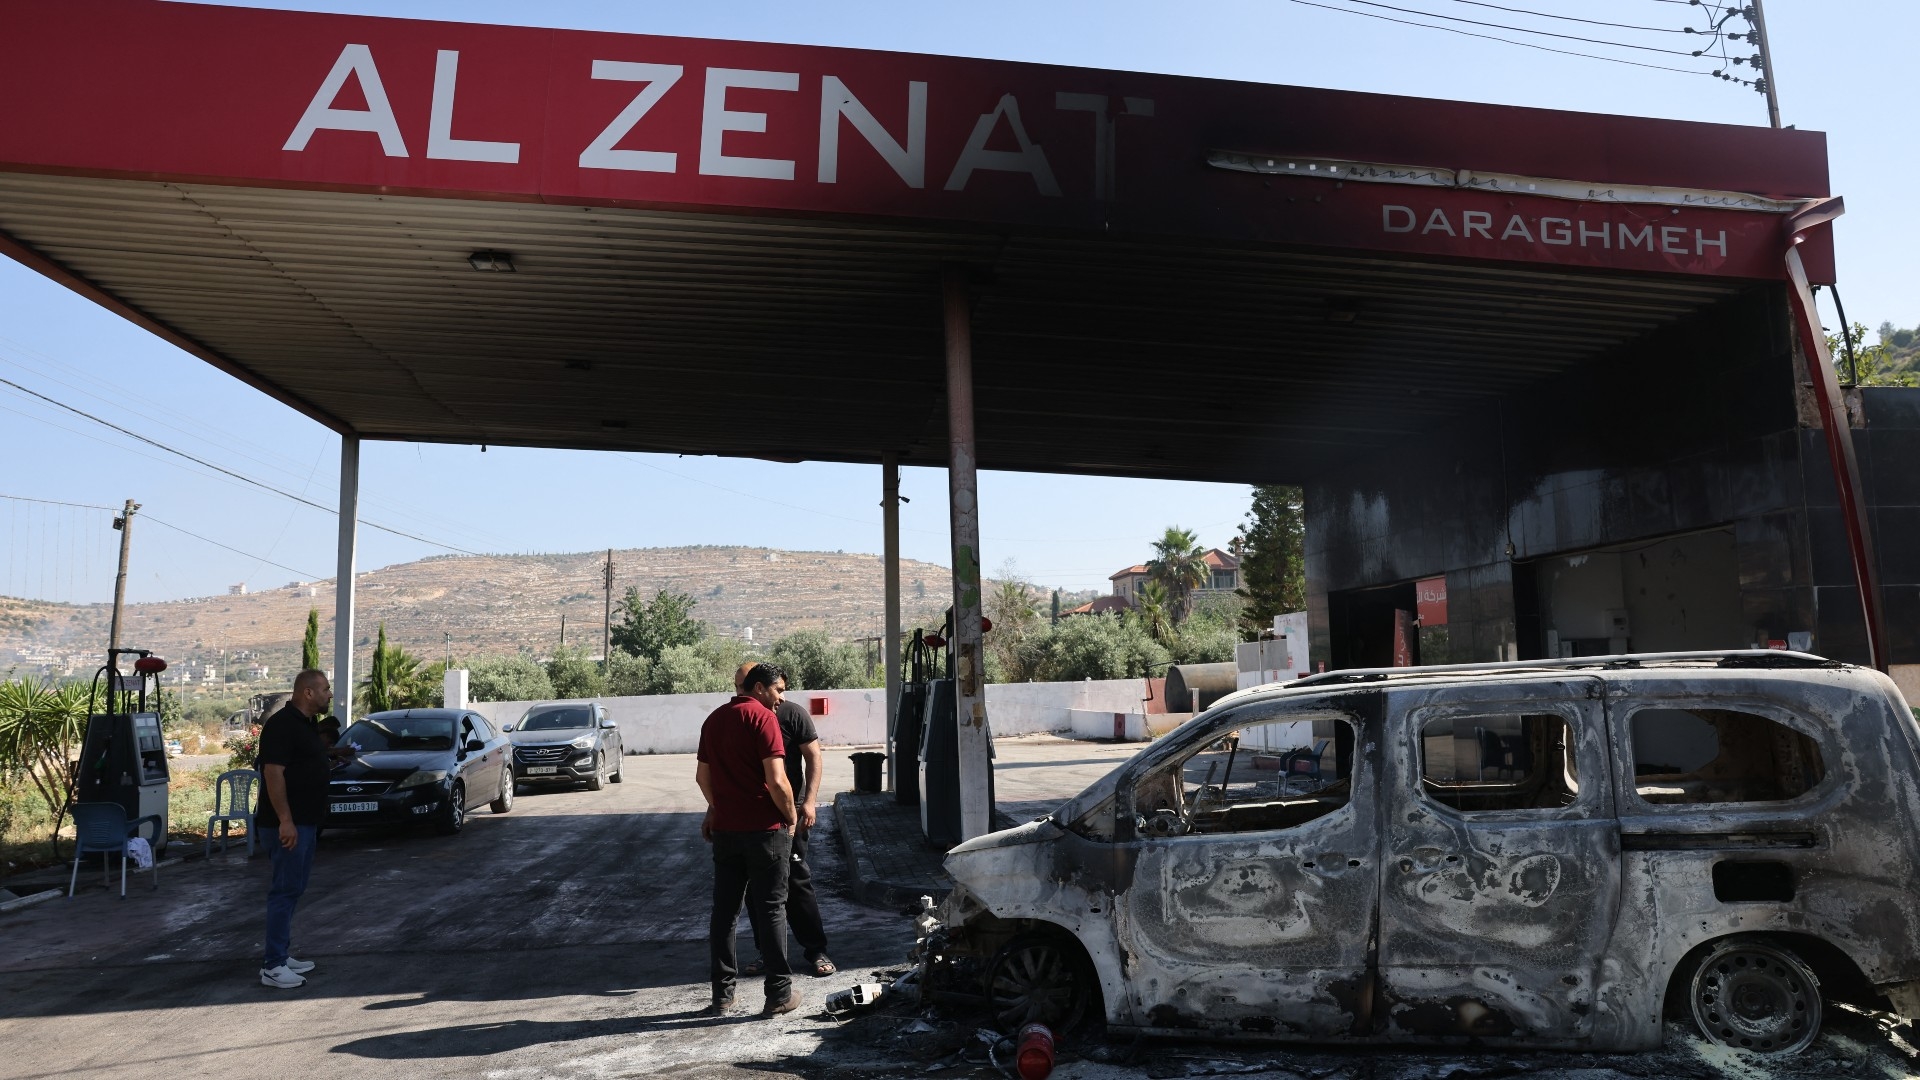 People stand near a burnt car, reportedly set ablaze by Israeli settlers, at a petrol station in Lubban al-Sharqiya in the occupied West Bank on 21 June (AFP)